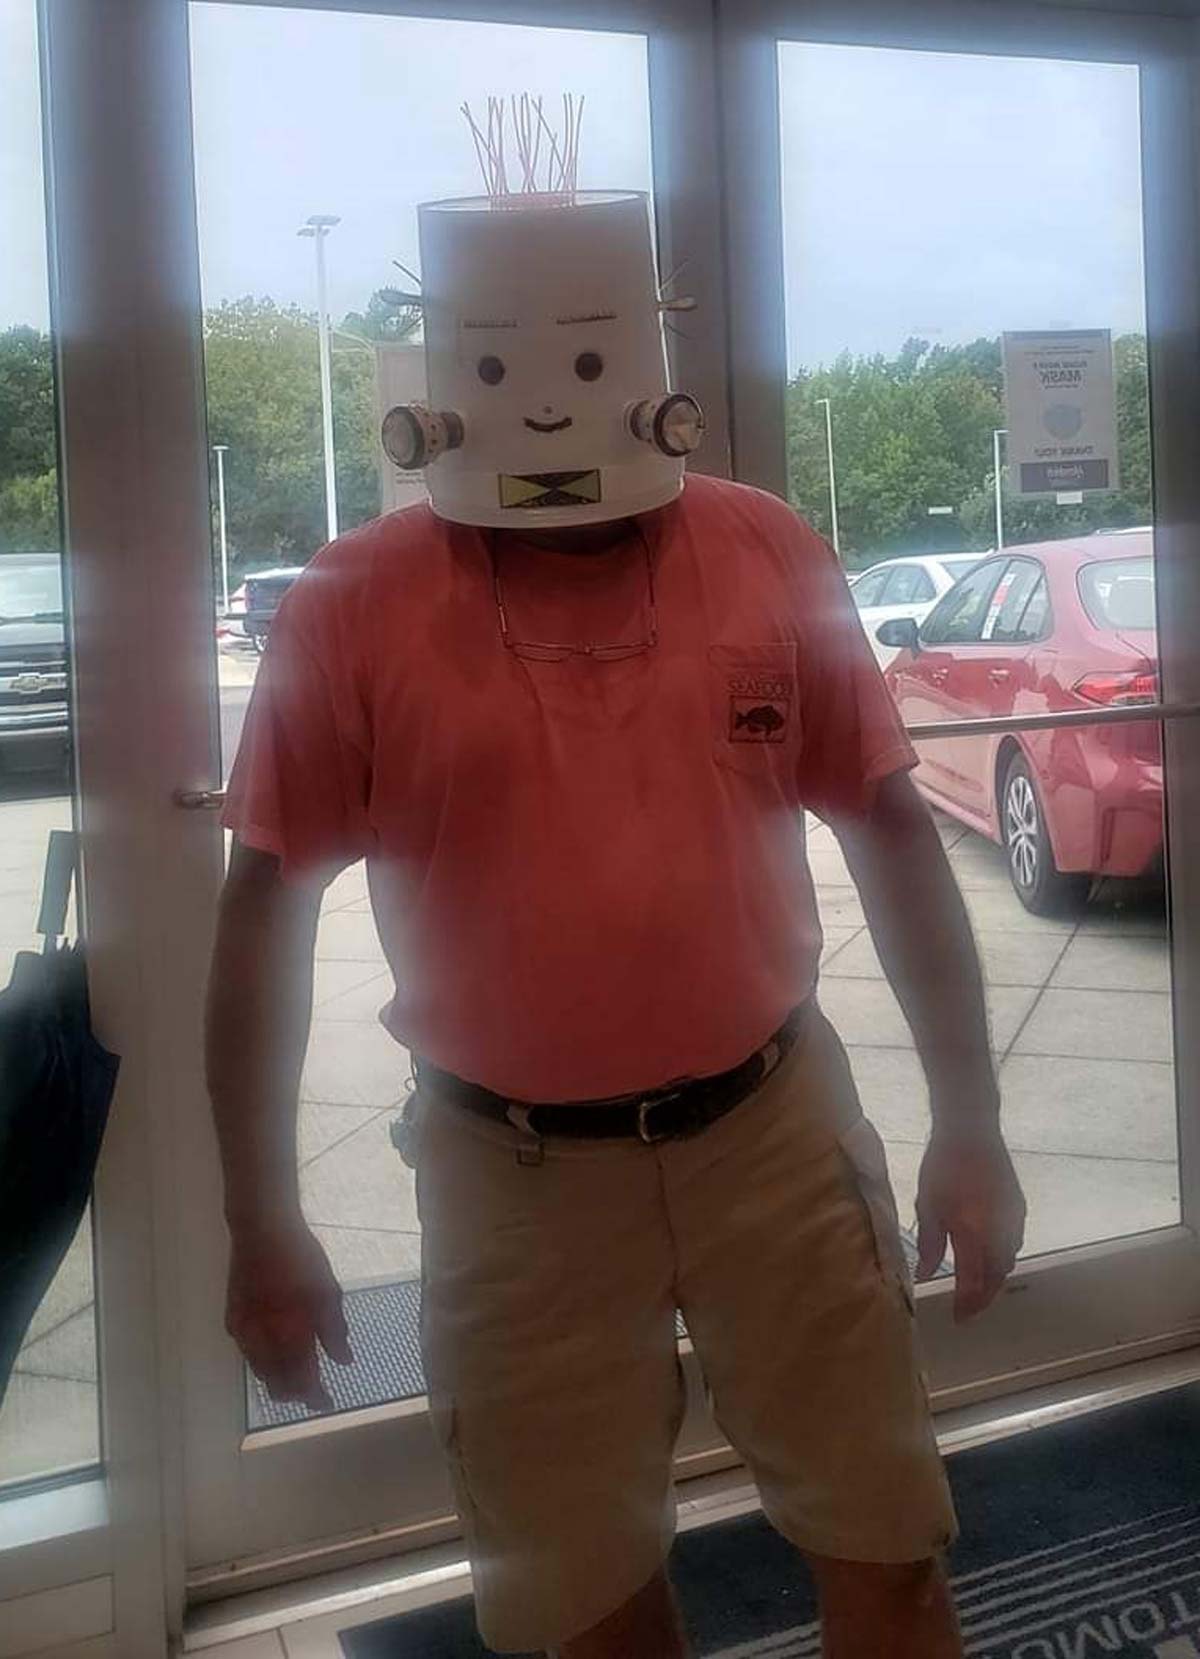 This homemade mask